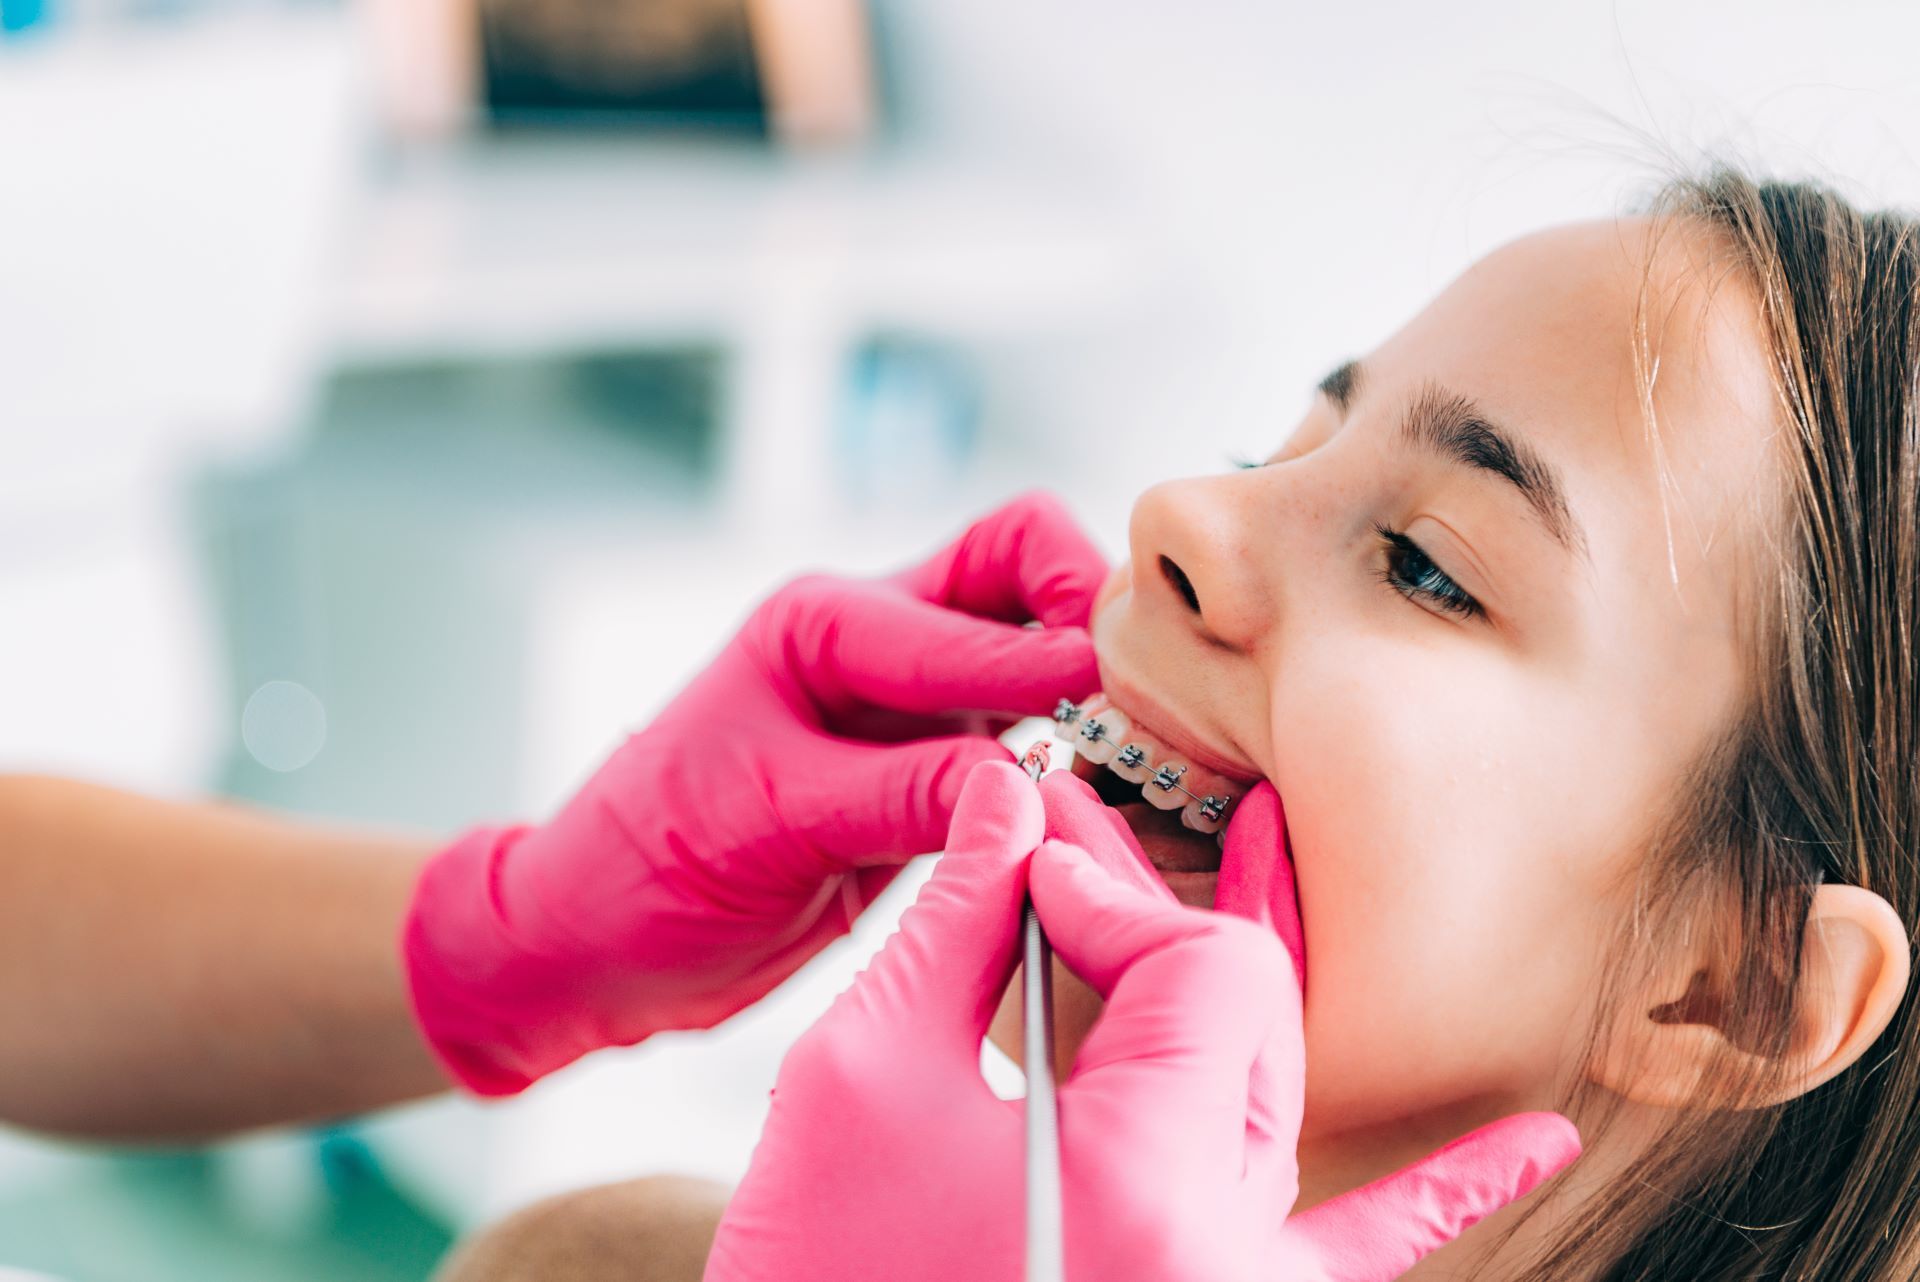 orthodontist checking young girls braces while wearing pink gloves